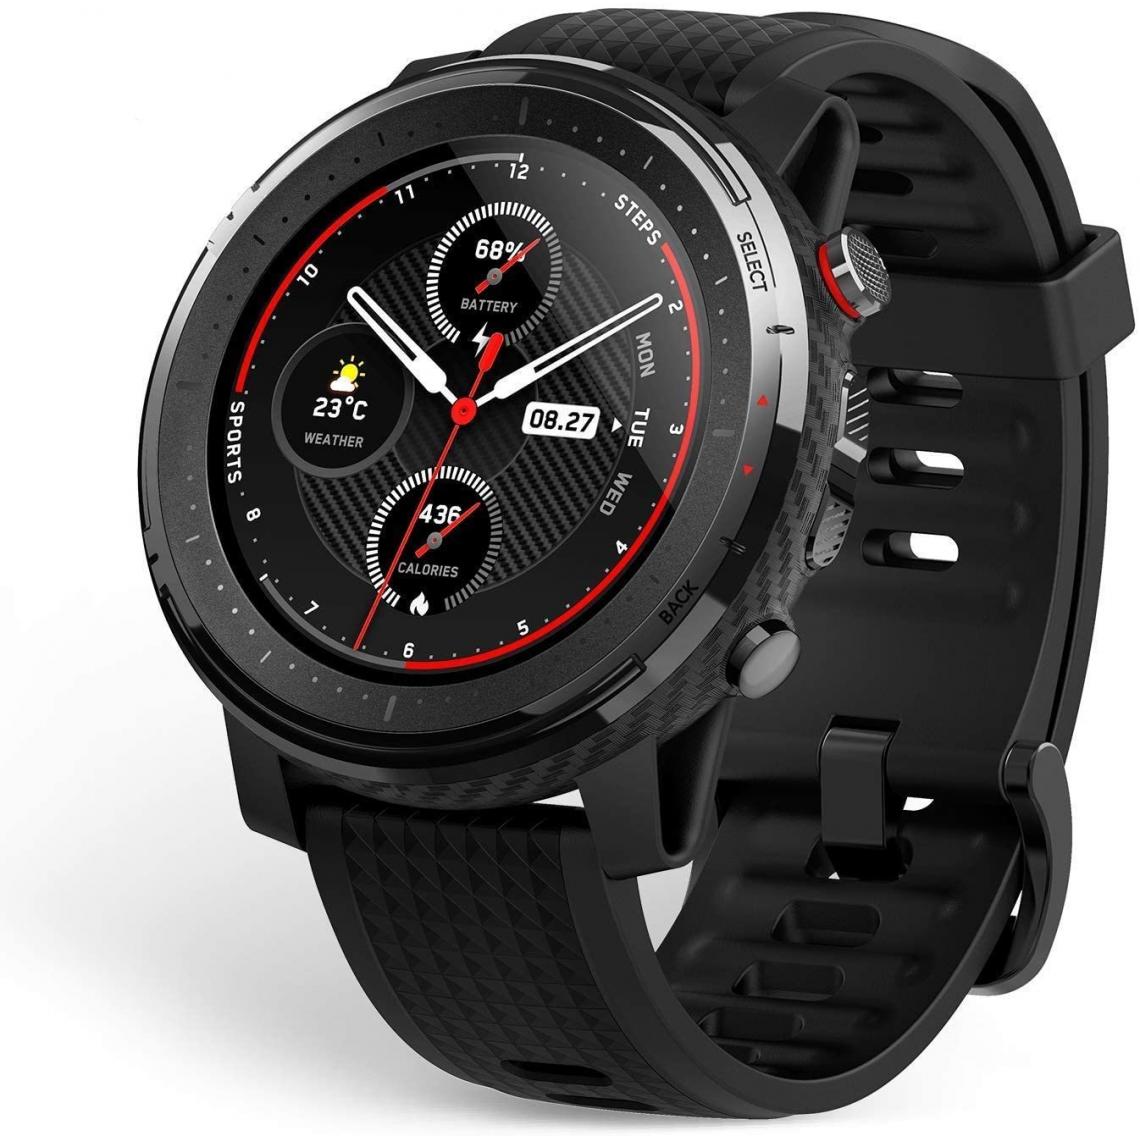 Chronotech Montres - Amazfit Stratos 3 Smartwatch Sports Watch with 1.34 Inch MIP Display, 19 Sports Modes, GPS and Music Storage, 5 ATM Waterproof, Men's Fitness Tracker(black) - Montre connectée